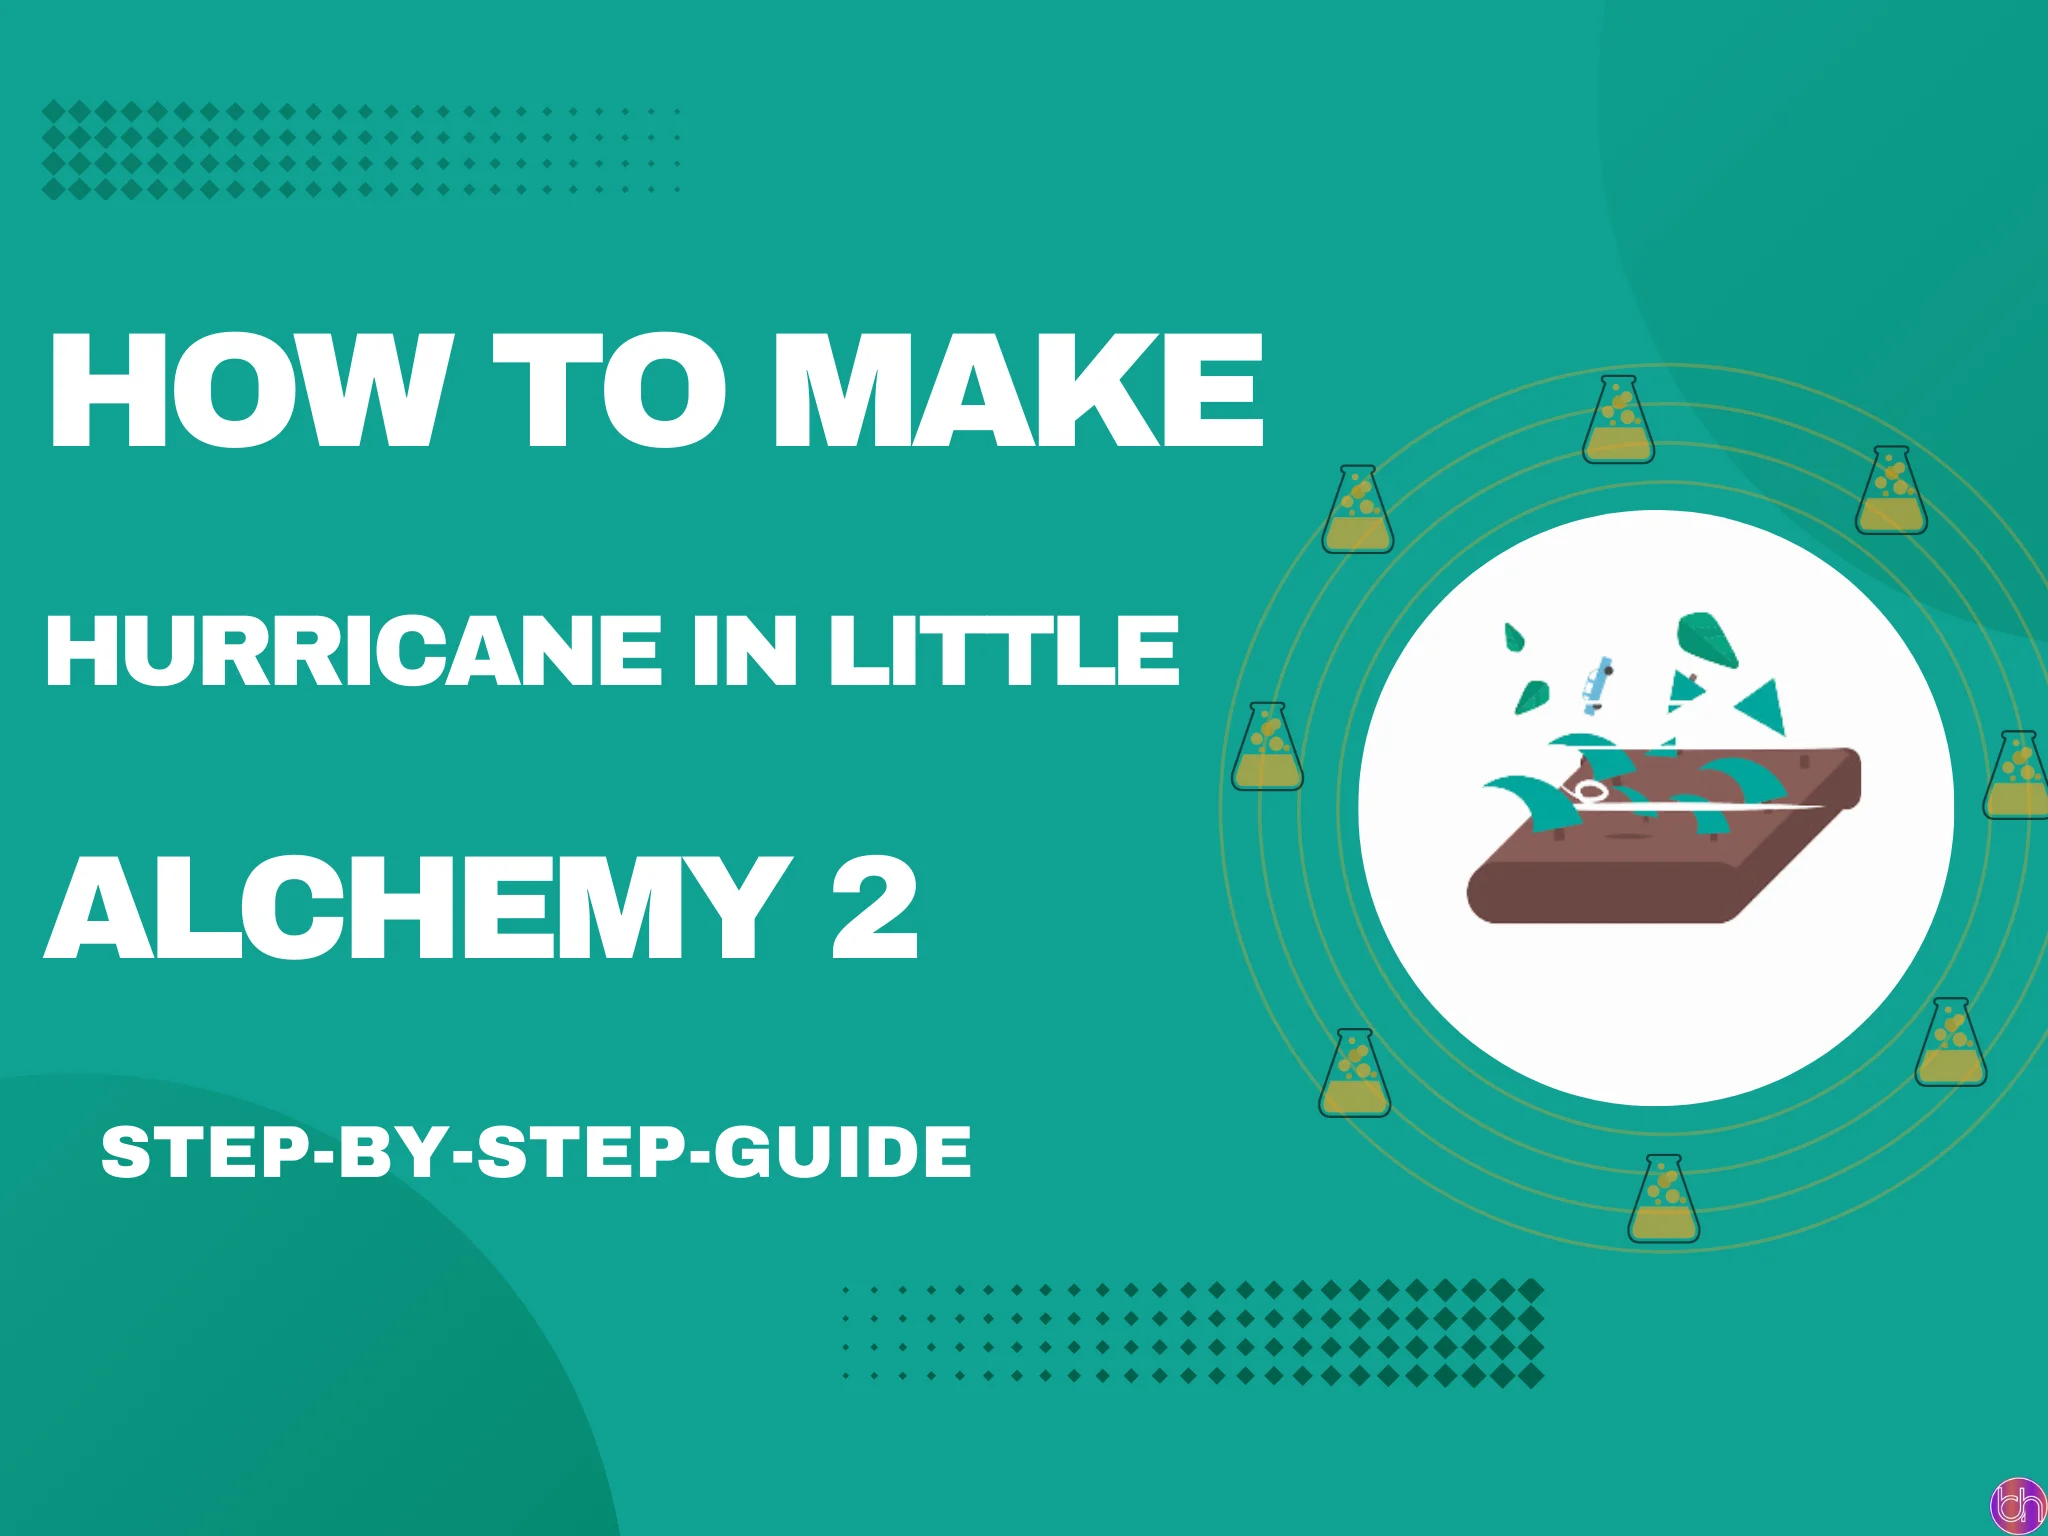 how to make Hurricane in little alchemy 2